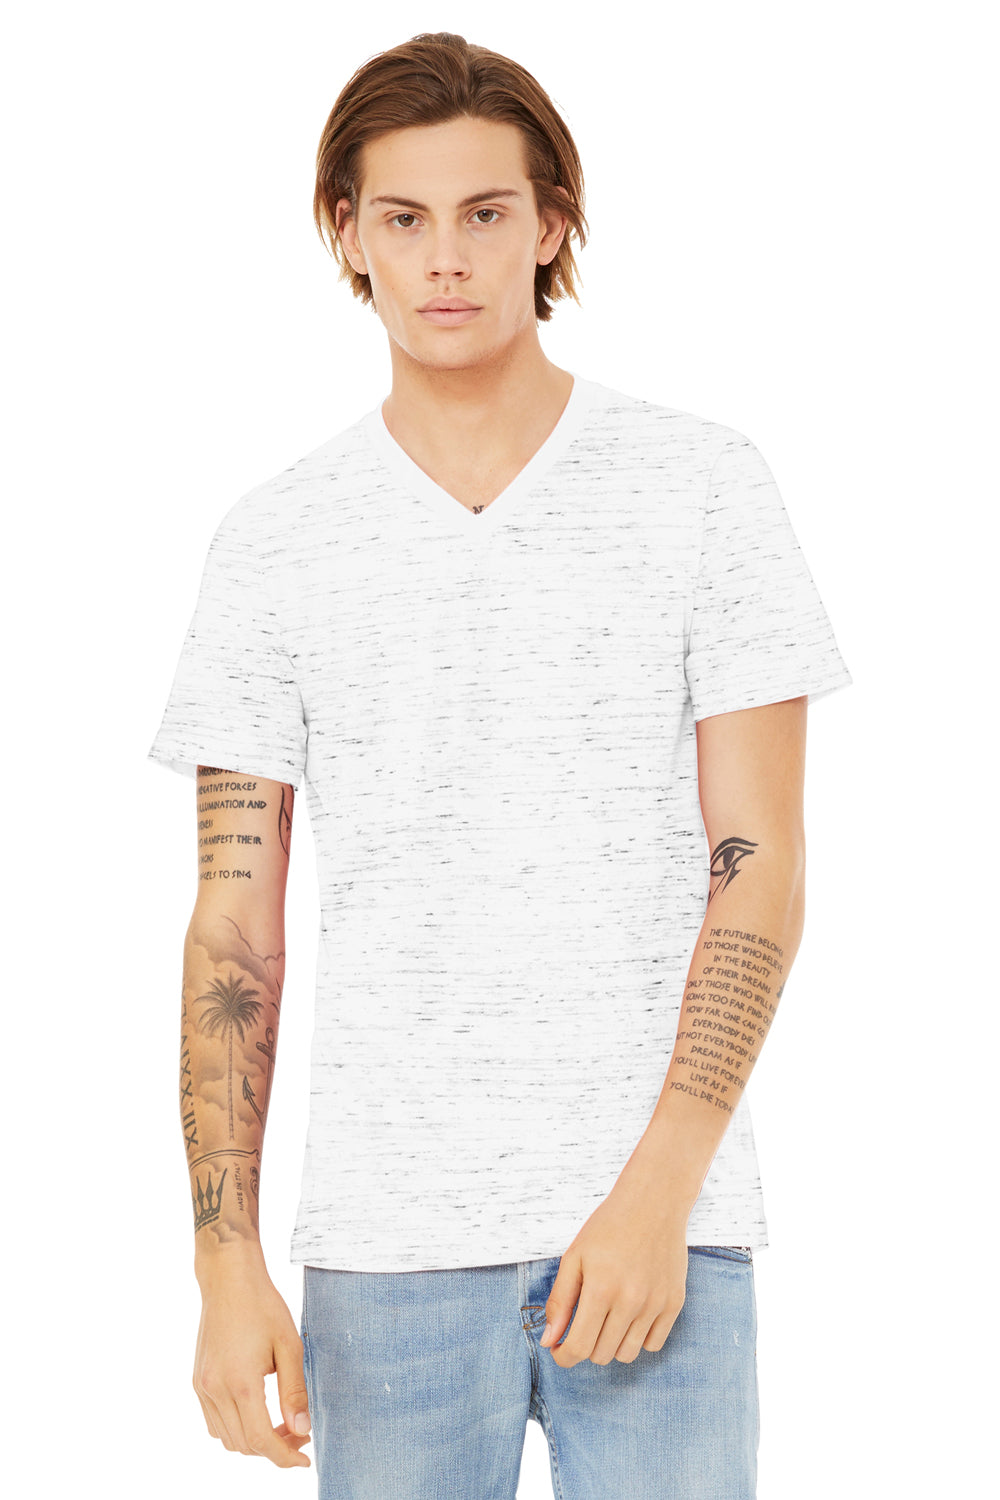 Bella + Canvas BC3655/3655C Mens Textured Jersey Short Sleeve V-Neck T-Shirt White Marble  Model Front